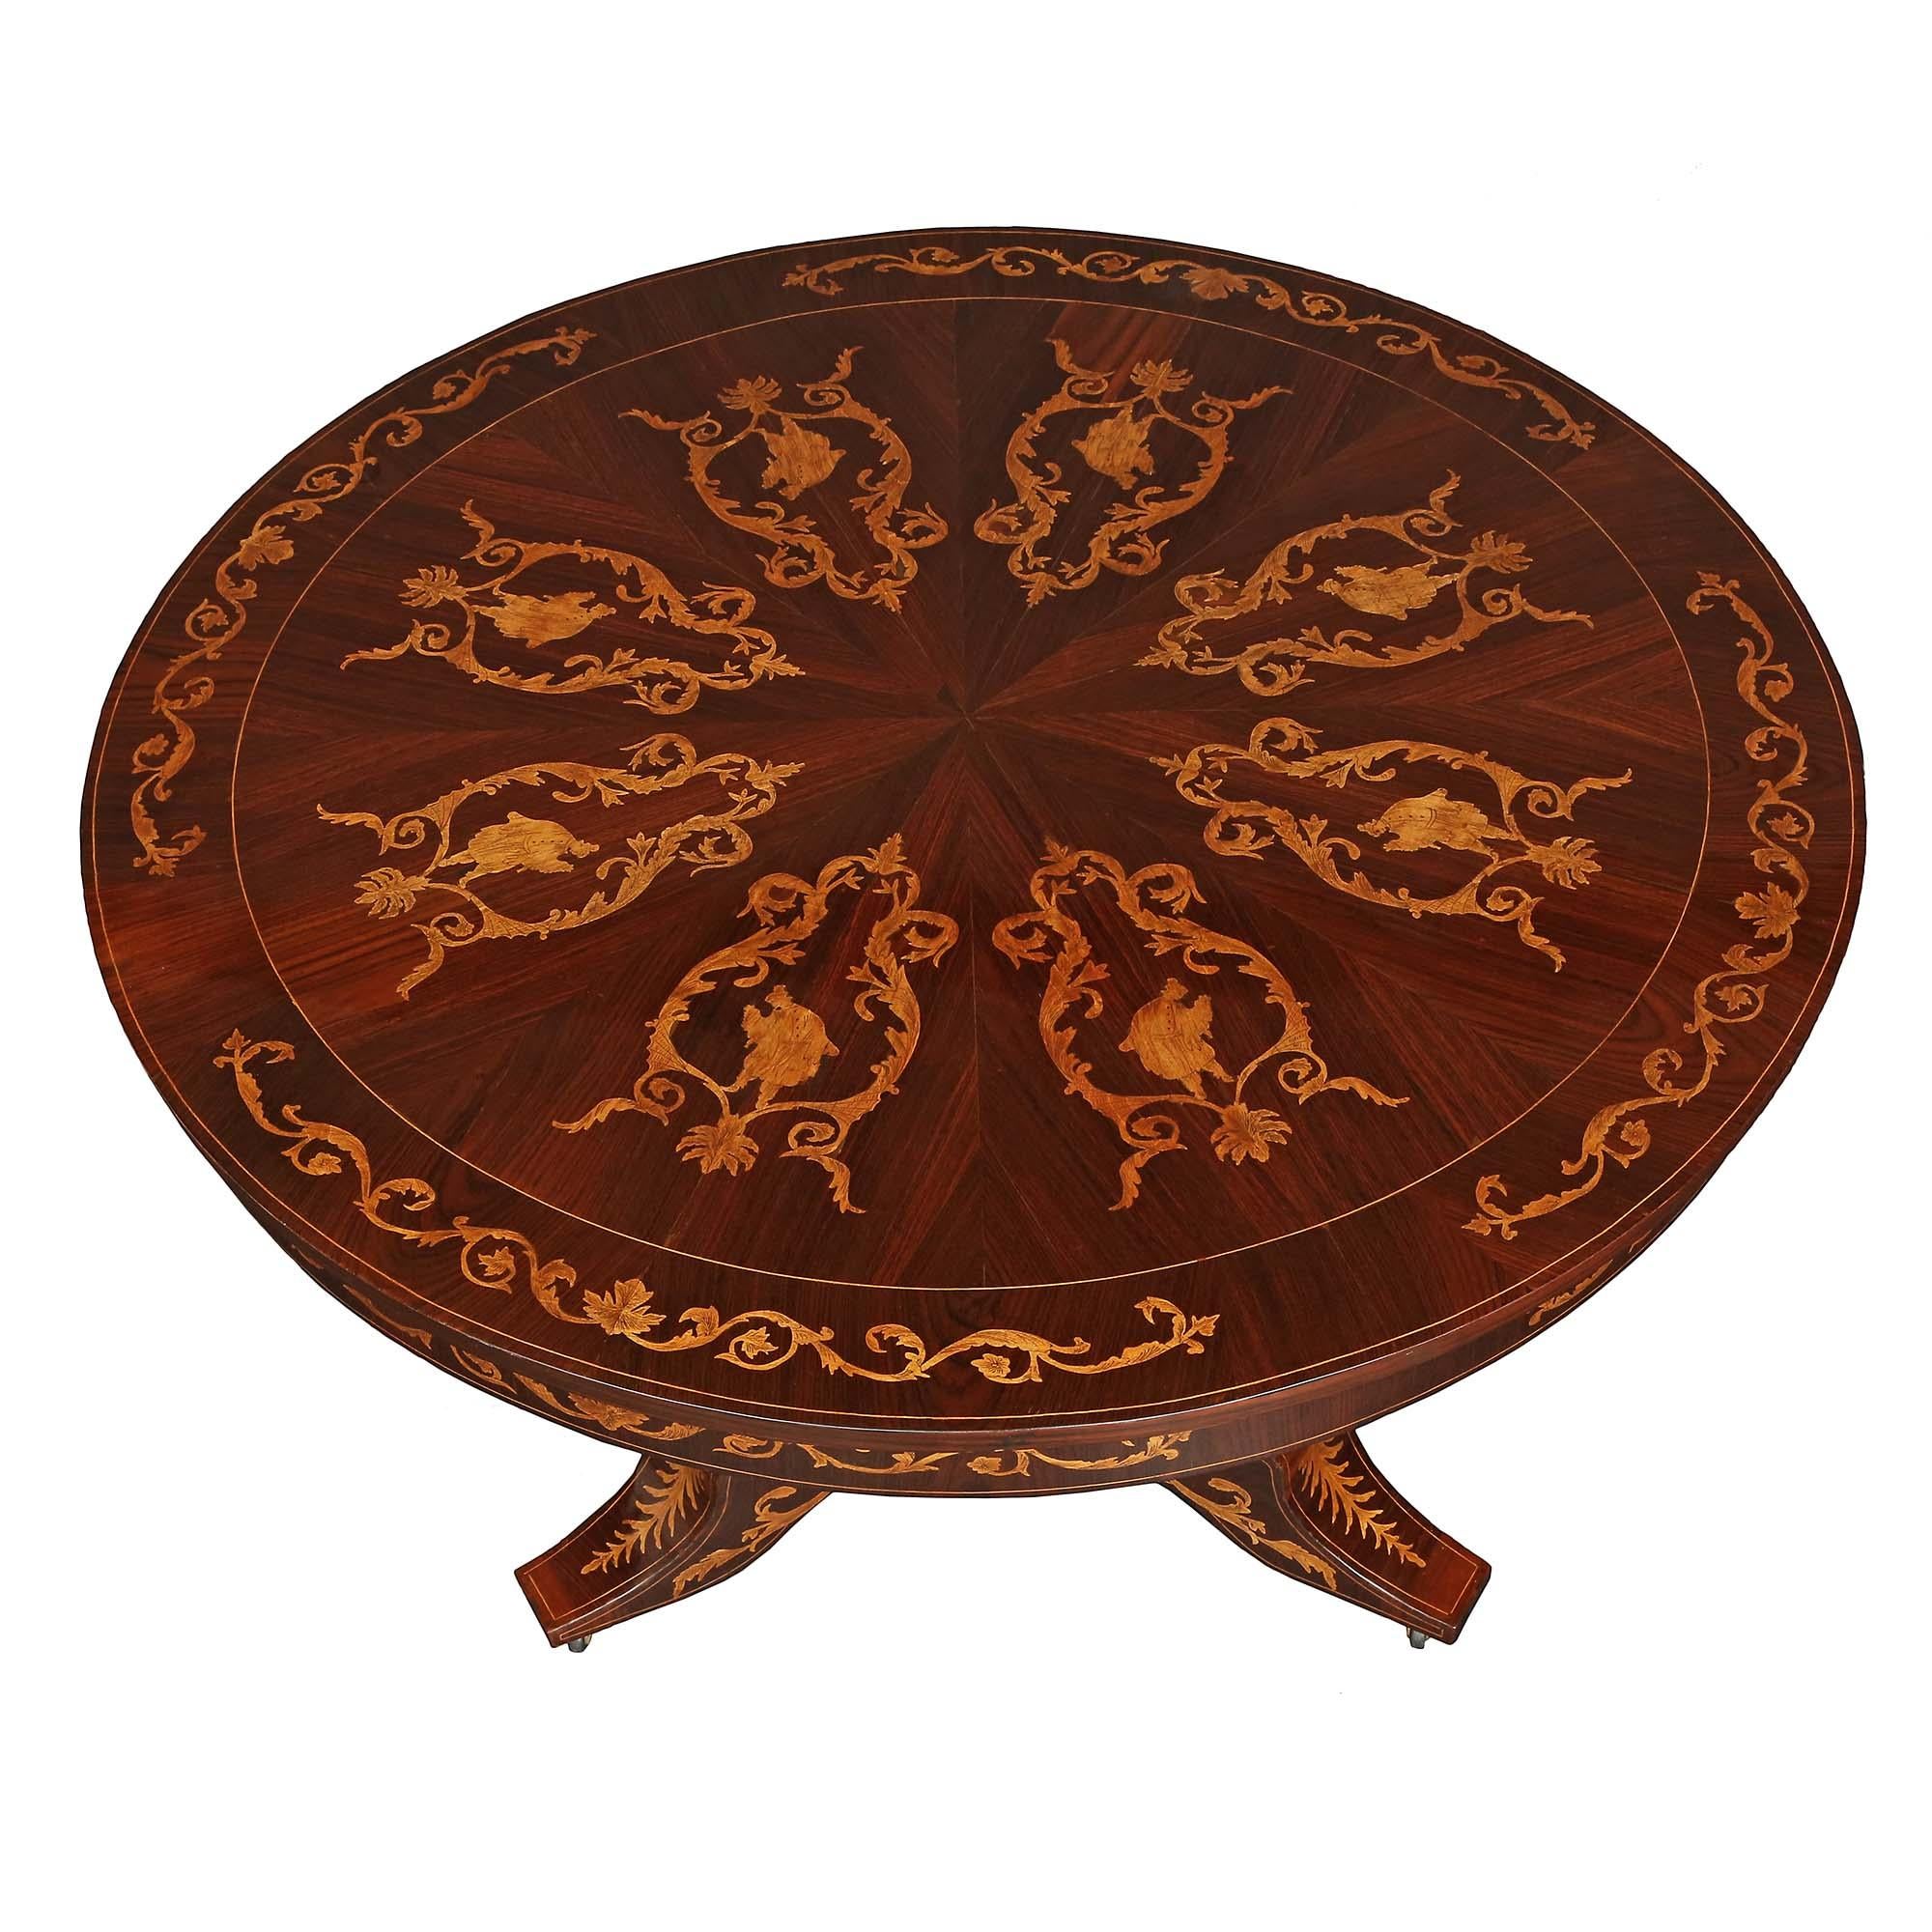 An outstanding Italian 19th century walnut and fruitwood inlaid center table. The circular table is raised by casters leading up three supports to the triangular tapered central fut with concave sides and rich fruitwood inlays of palmettes and